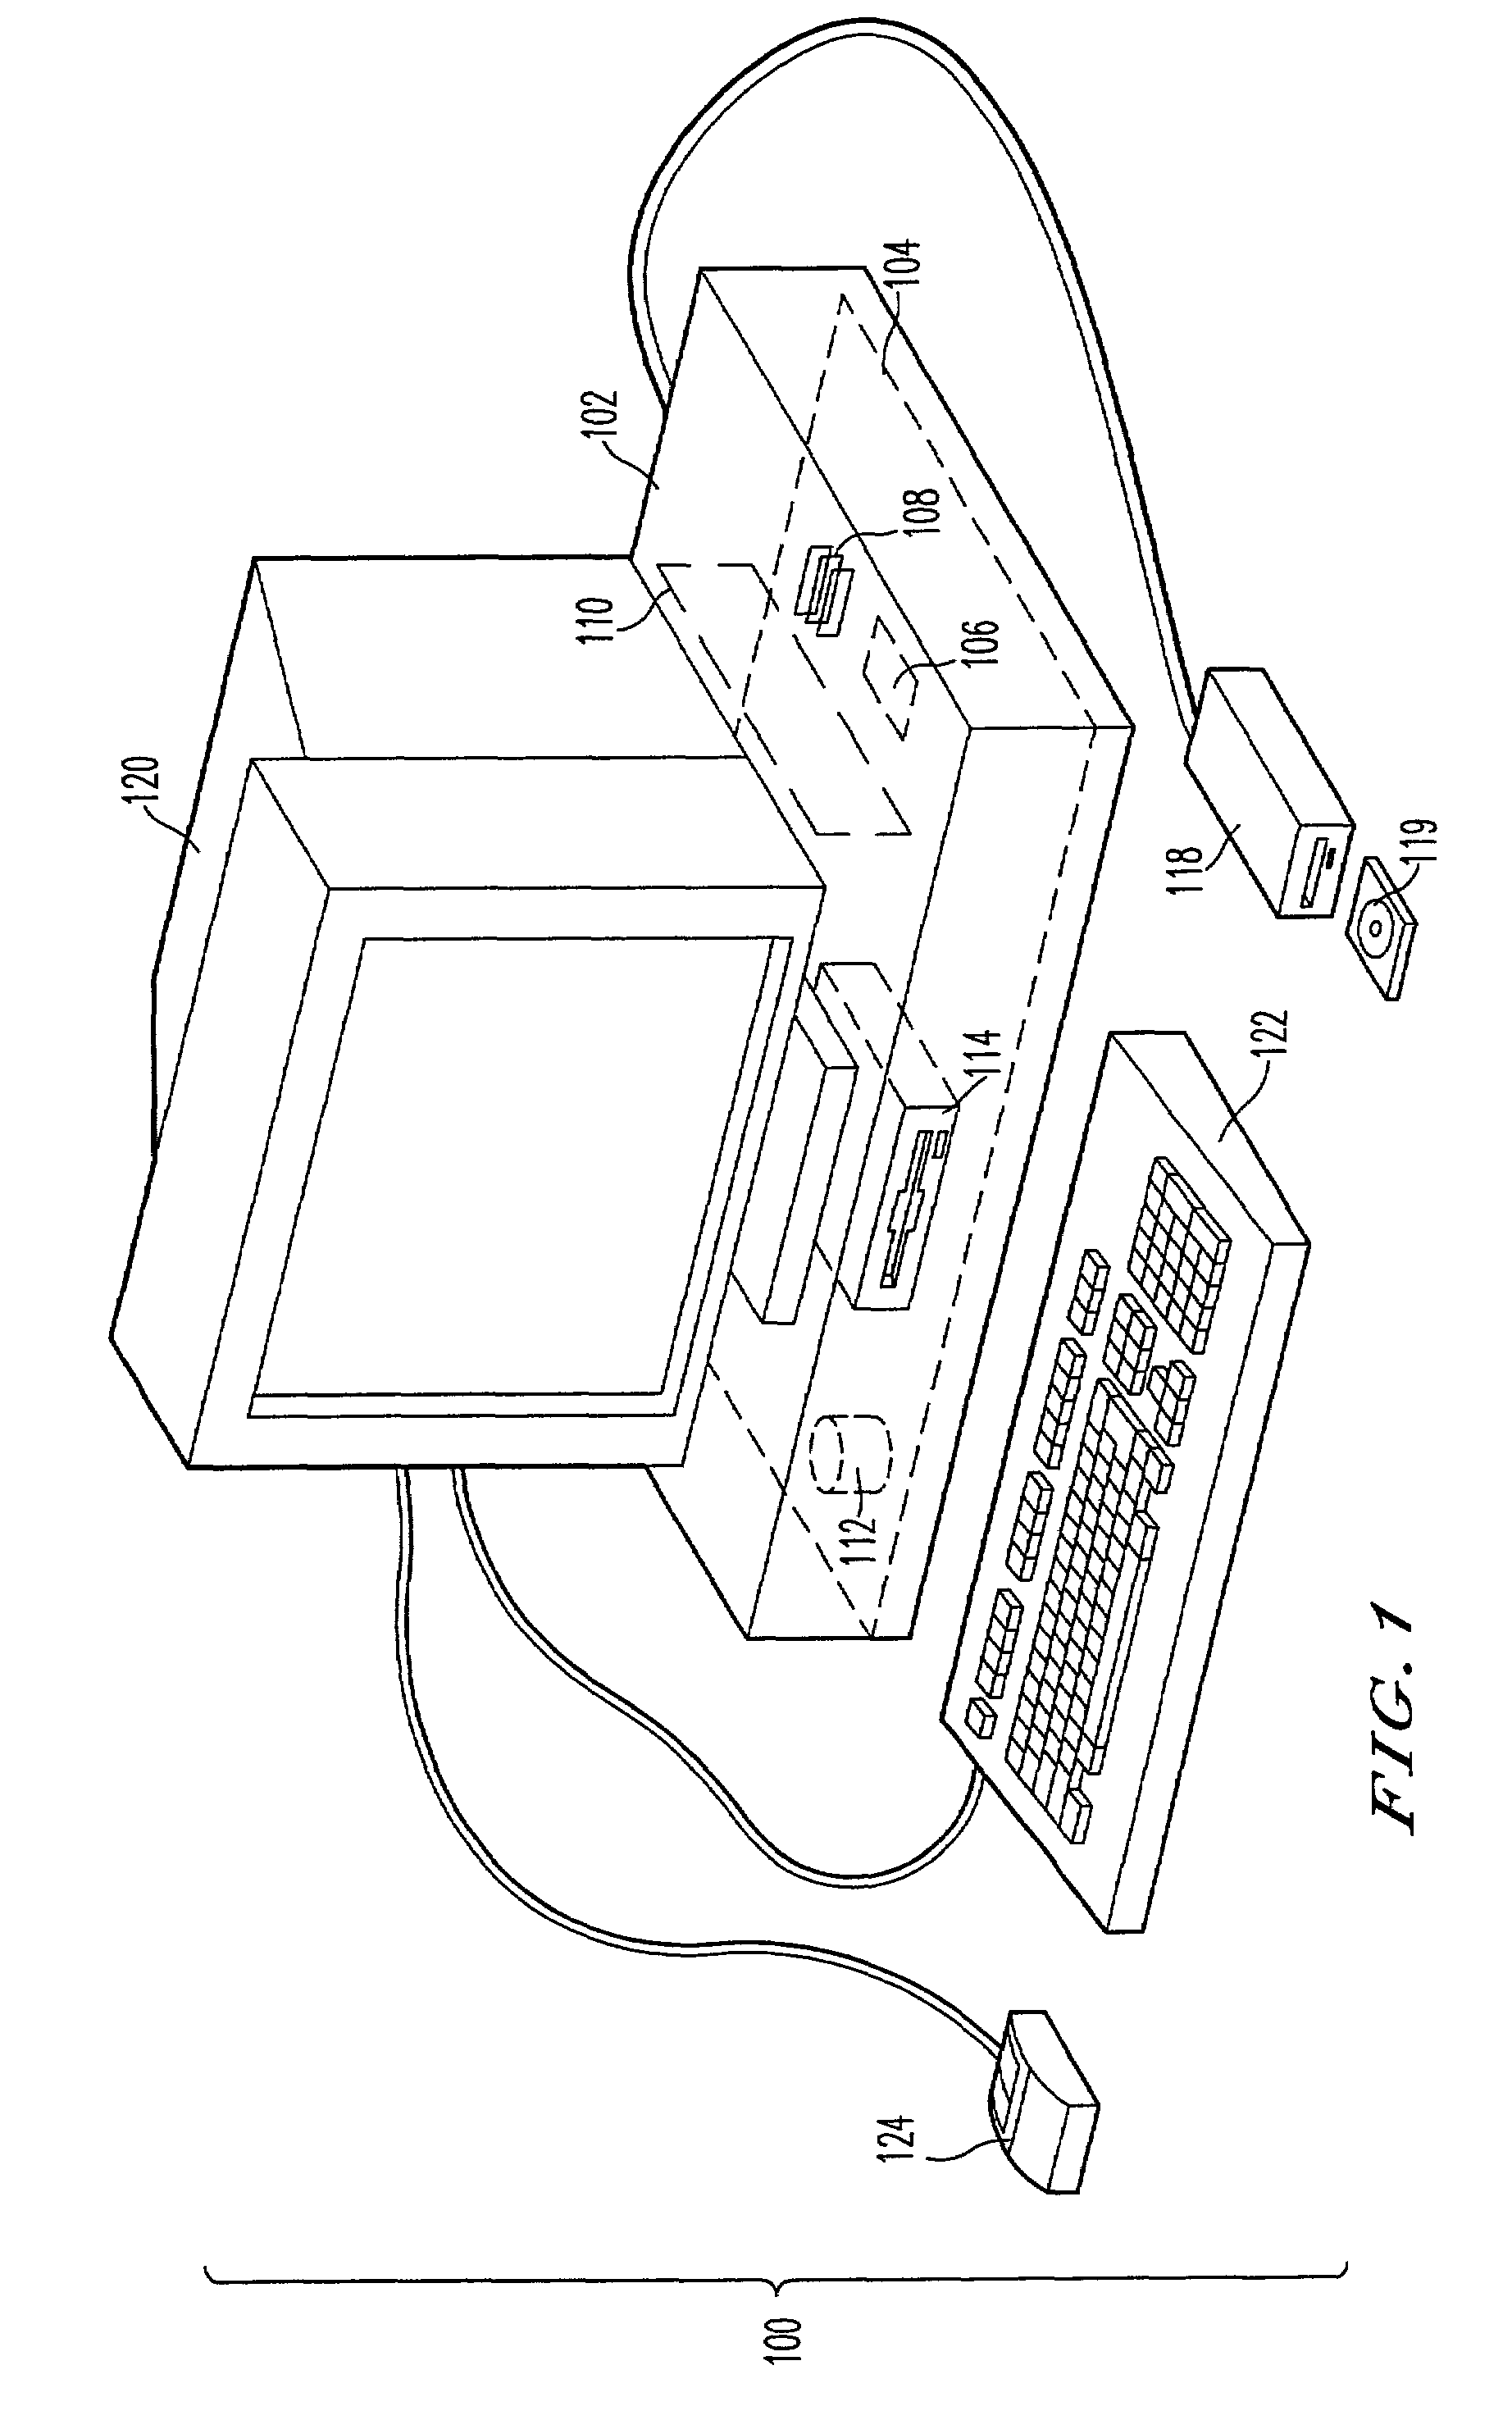 System for enabling multiple clients to interact together over a network with a secure web page